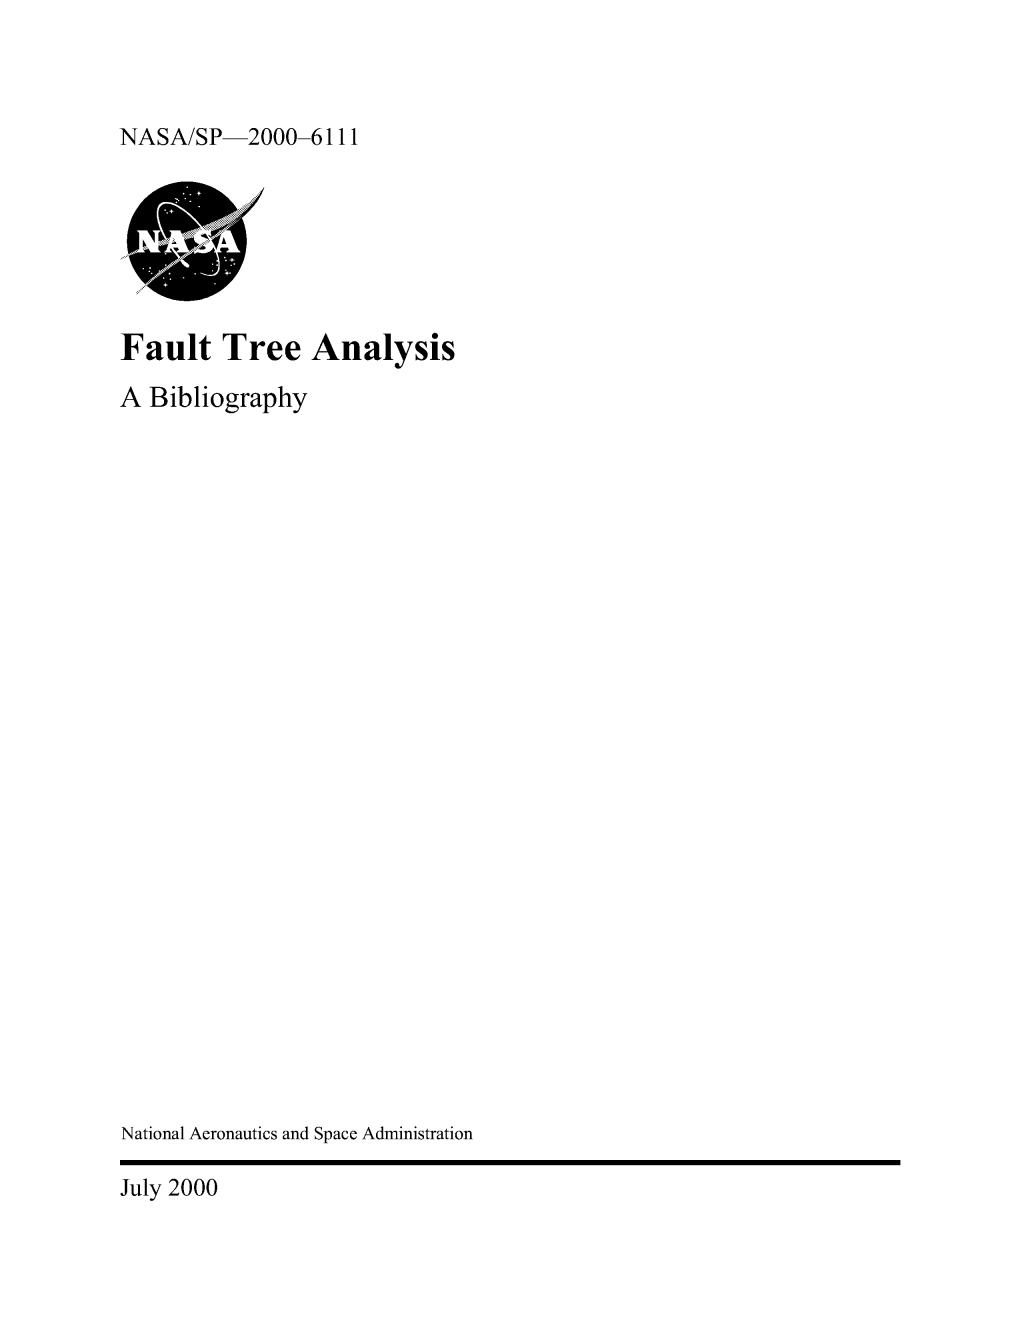 Fault Tree Analysis a Bibliography